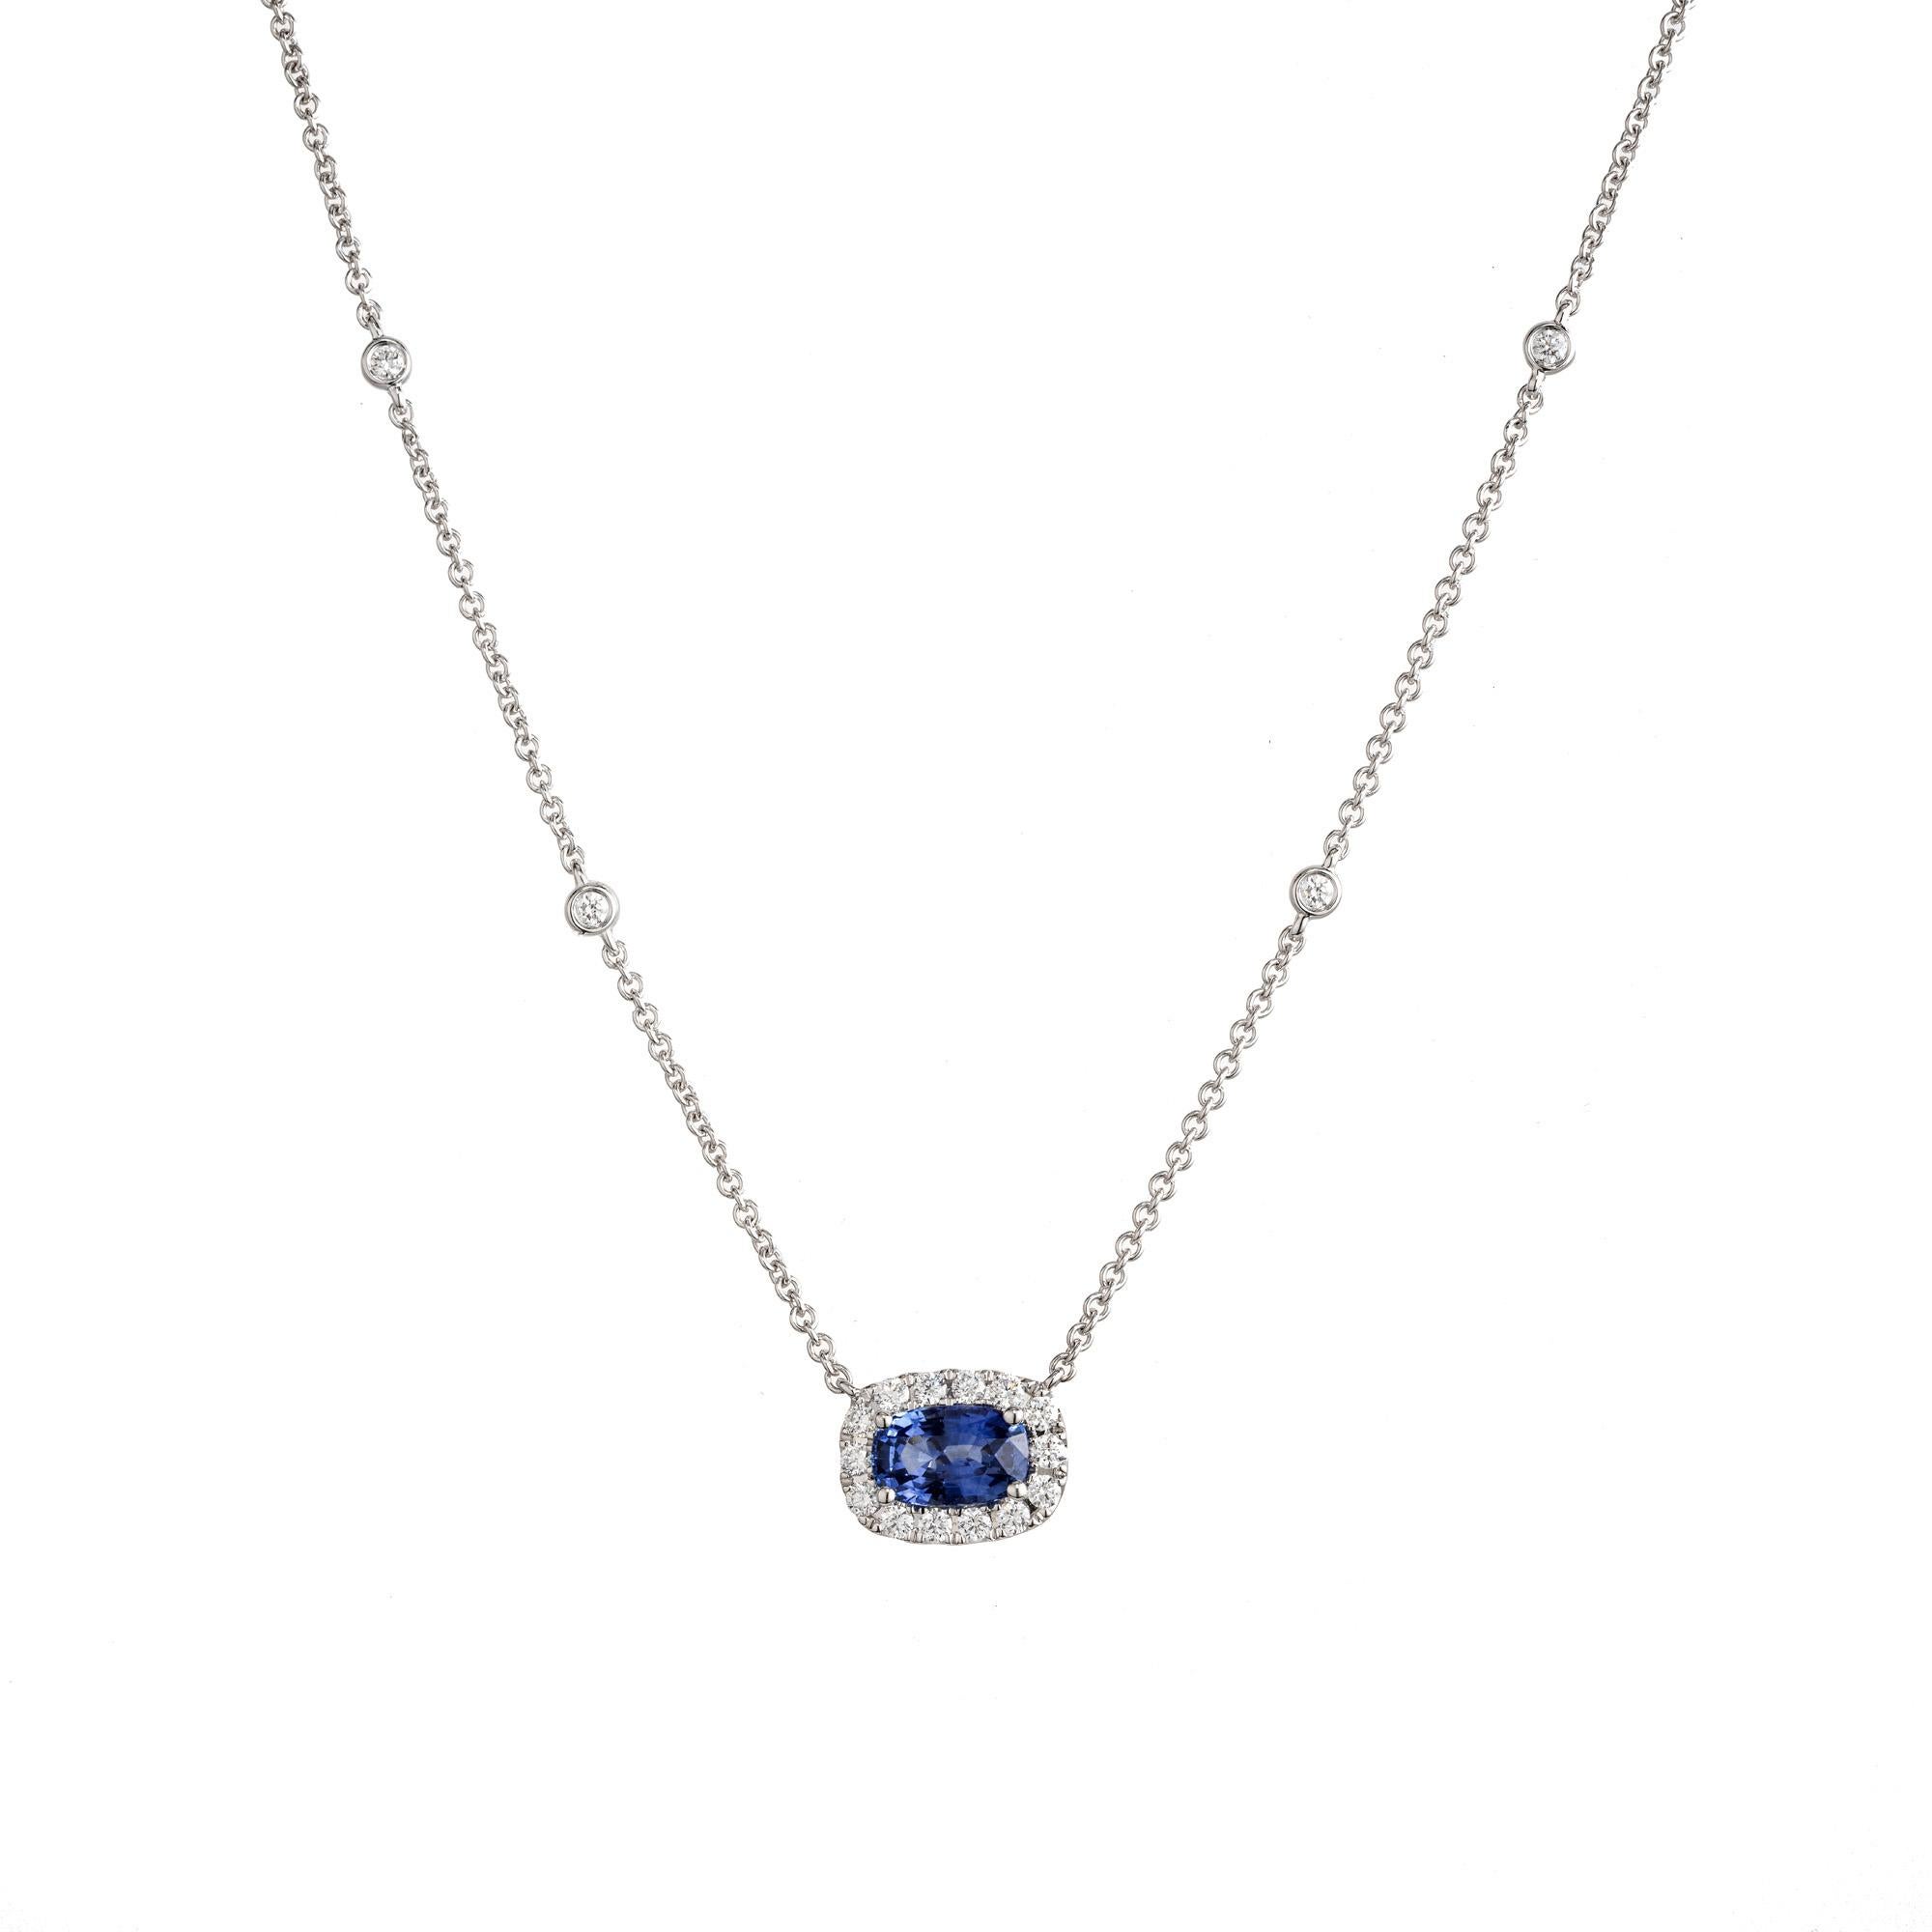 Cushion set sapphire and diamond pendant necklace. 1.29ct oval sapphire which is set sideways and is adorned with a halo of 24 round brilliant cut diamonds. The sapphire is certified by the ICA GemLab as natural, no heat with an origin of Sri Lanka.